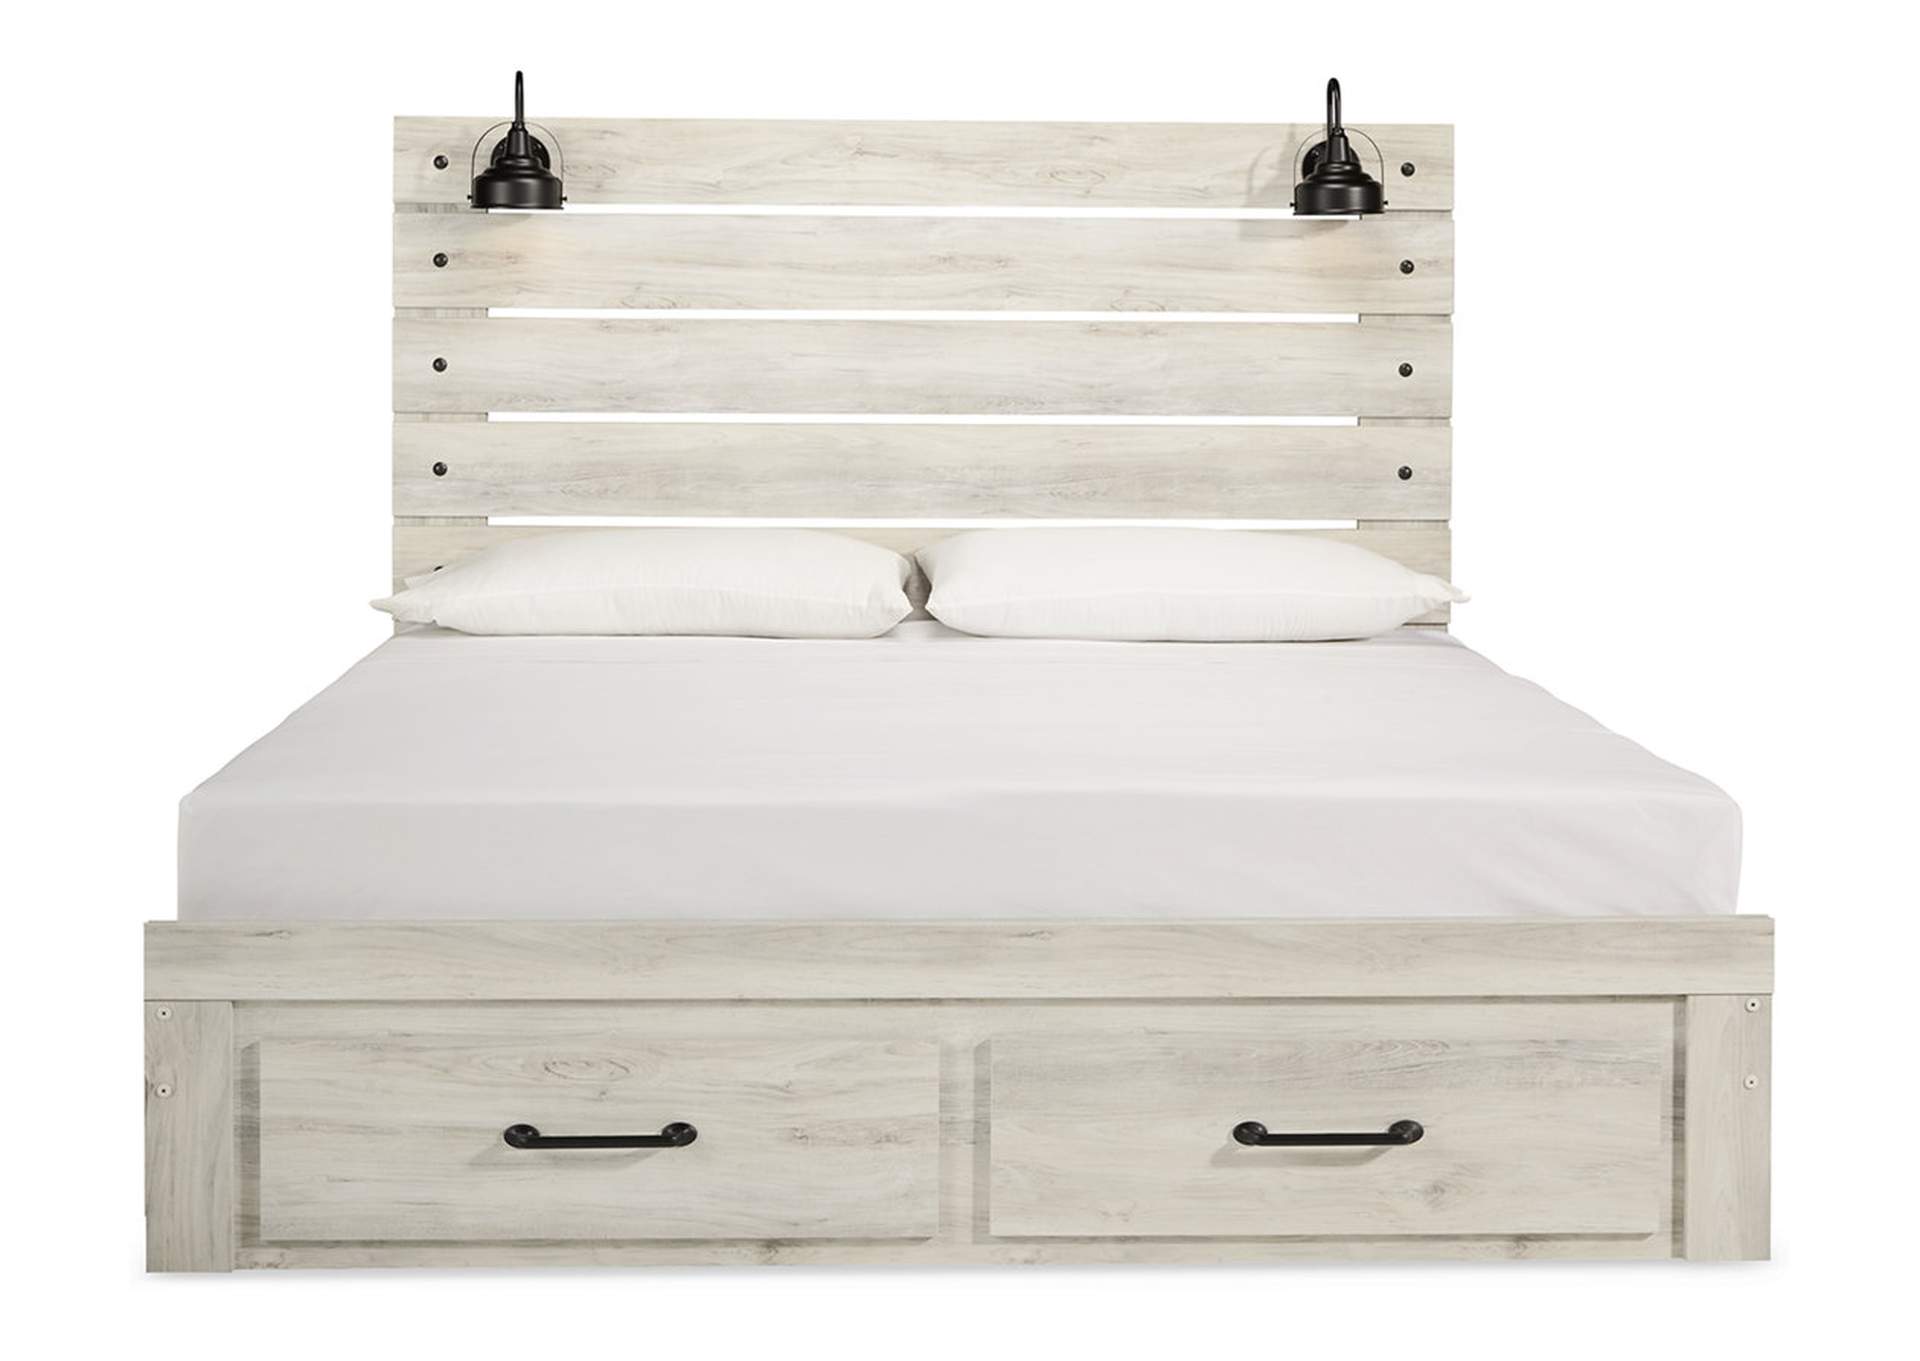 Cambeck King Panel Bed with 2 Storage Drawers,Signature Design By Ashley